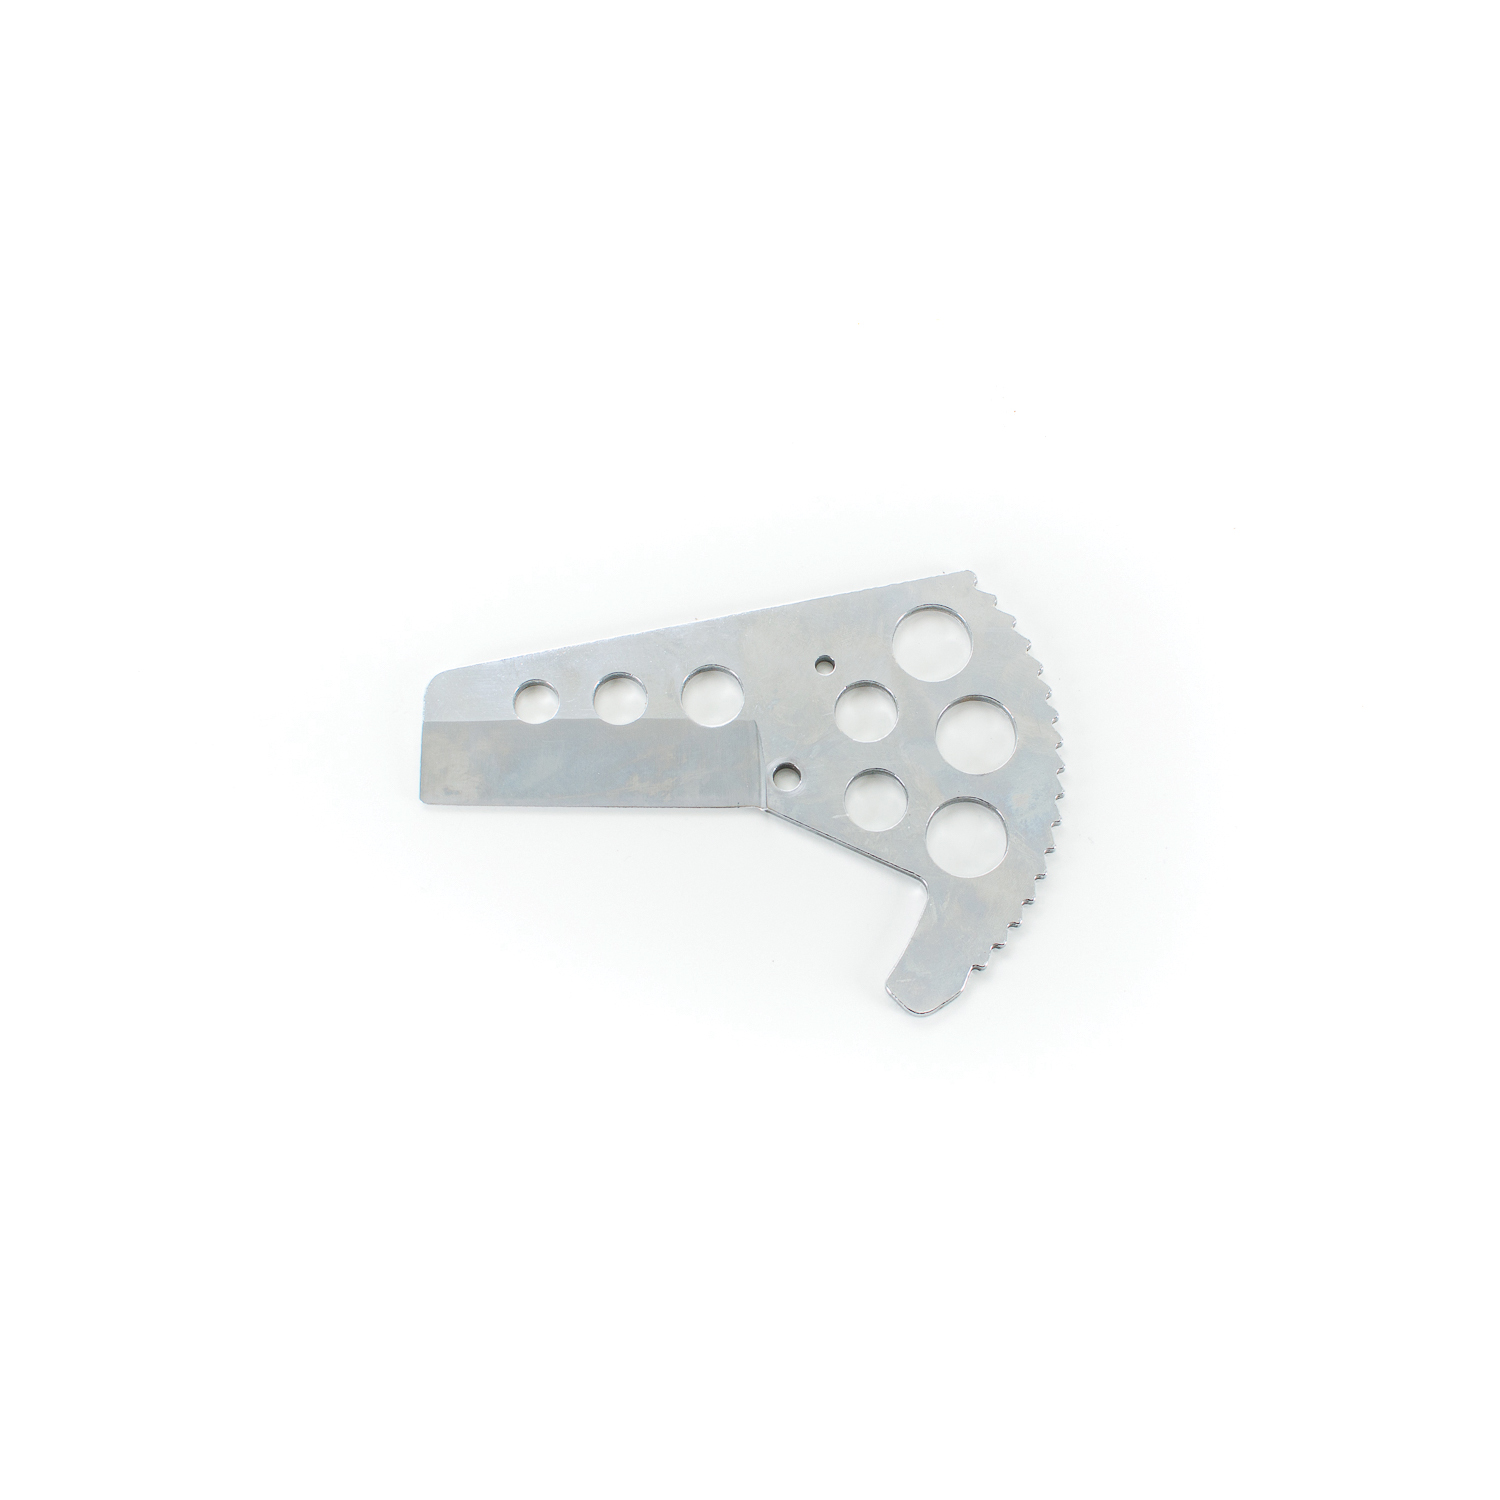 PASCO 4654-B Blade, For Use With 4654 Pro-Cut 2 in Plastic Pipe Cutter, Stainless Steel